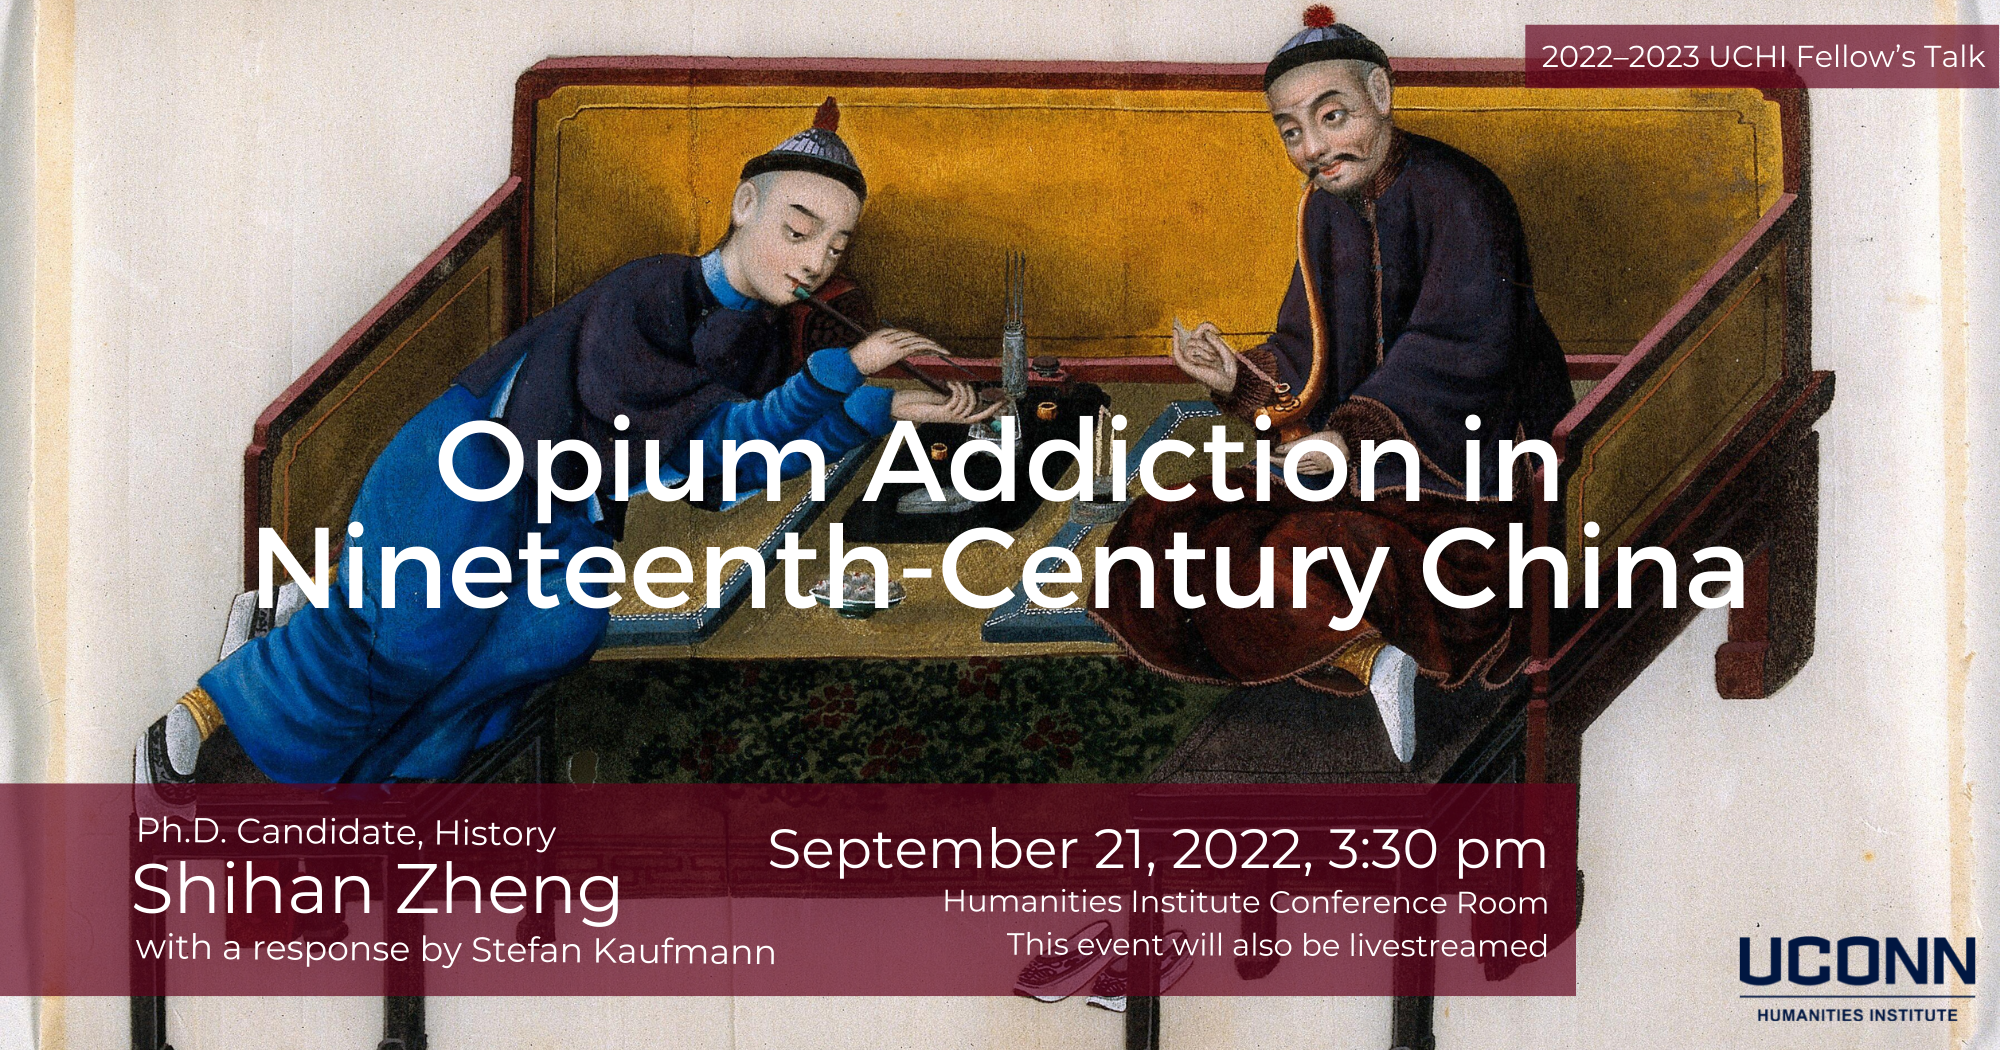 2022–23 Fellow's Talk. Opium Addiction in Nineteenth-Century China. Ph.D. Candidate History, Shihan Zheng, with a response by Stefan Kaufmann. September 21, 2022, 3:30pm. Humanities Institute Conference Room. This event will also be livestreamed.